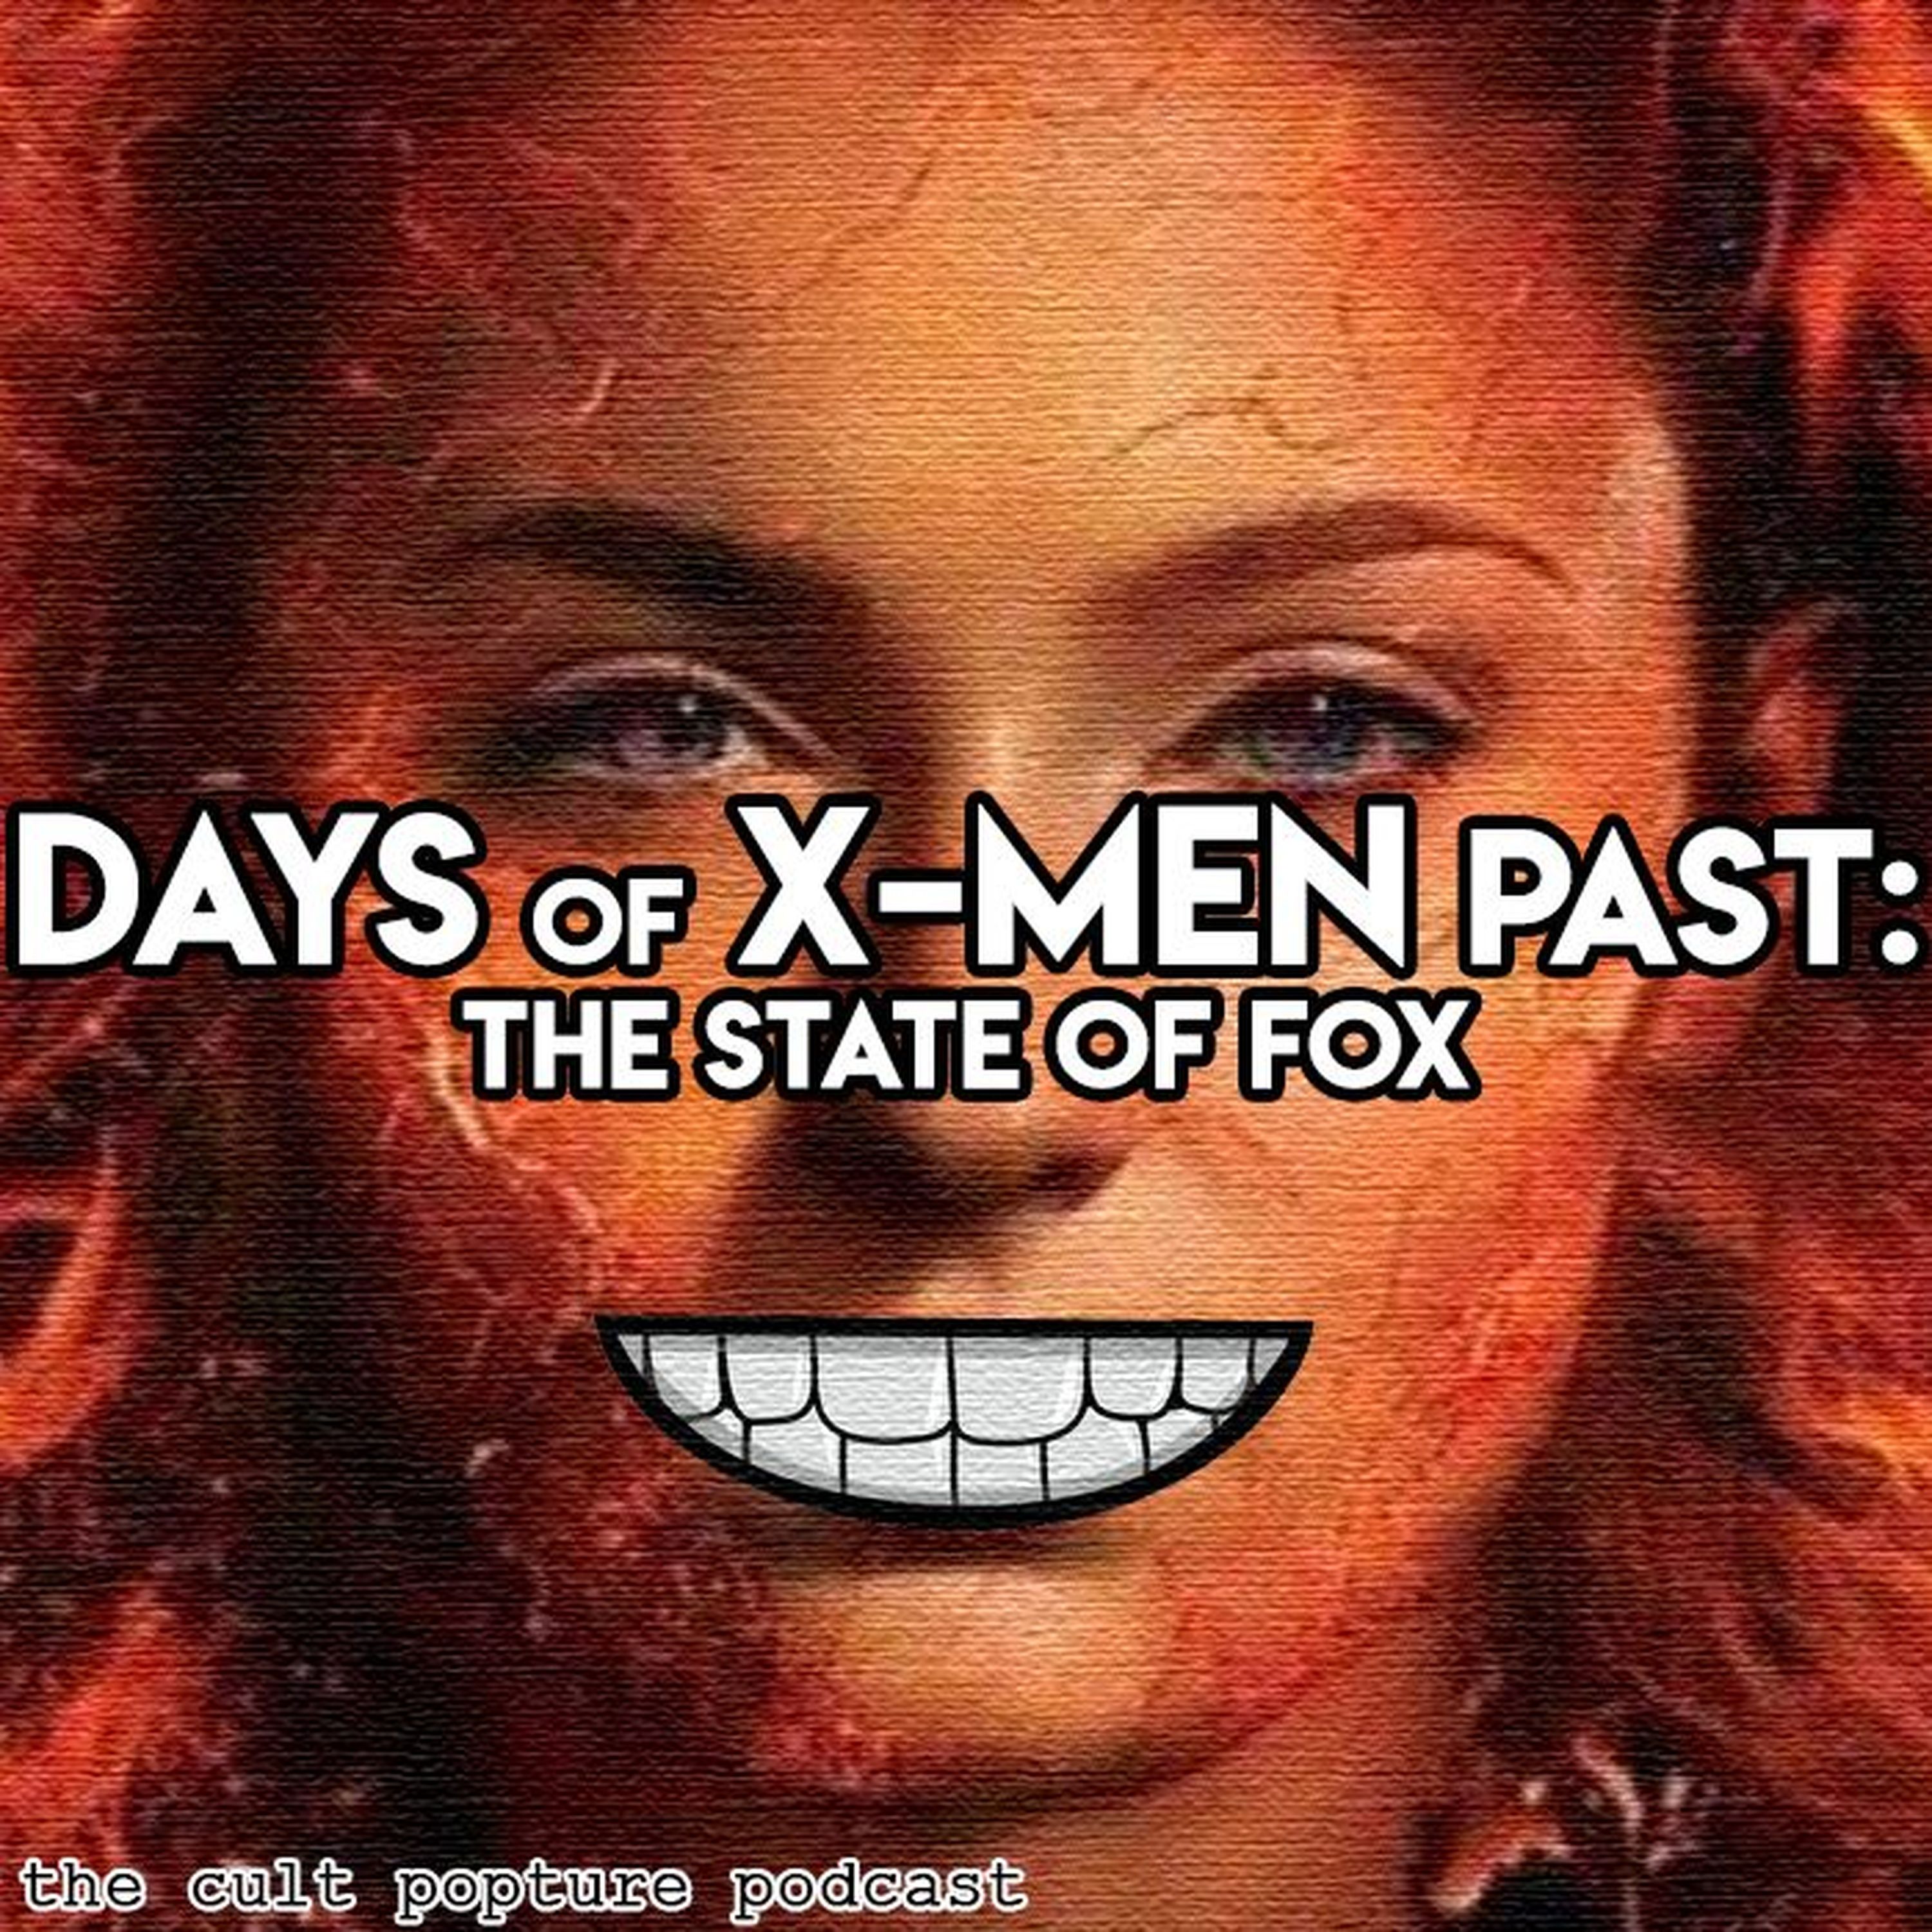 Days of X-Men Past: The State of Fox | The Cult Popture Podcast